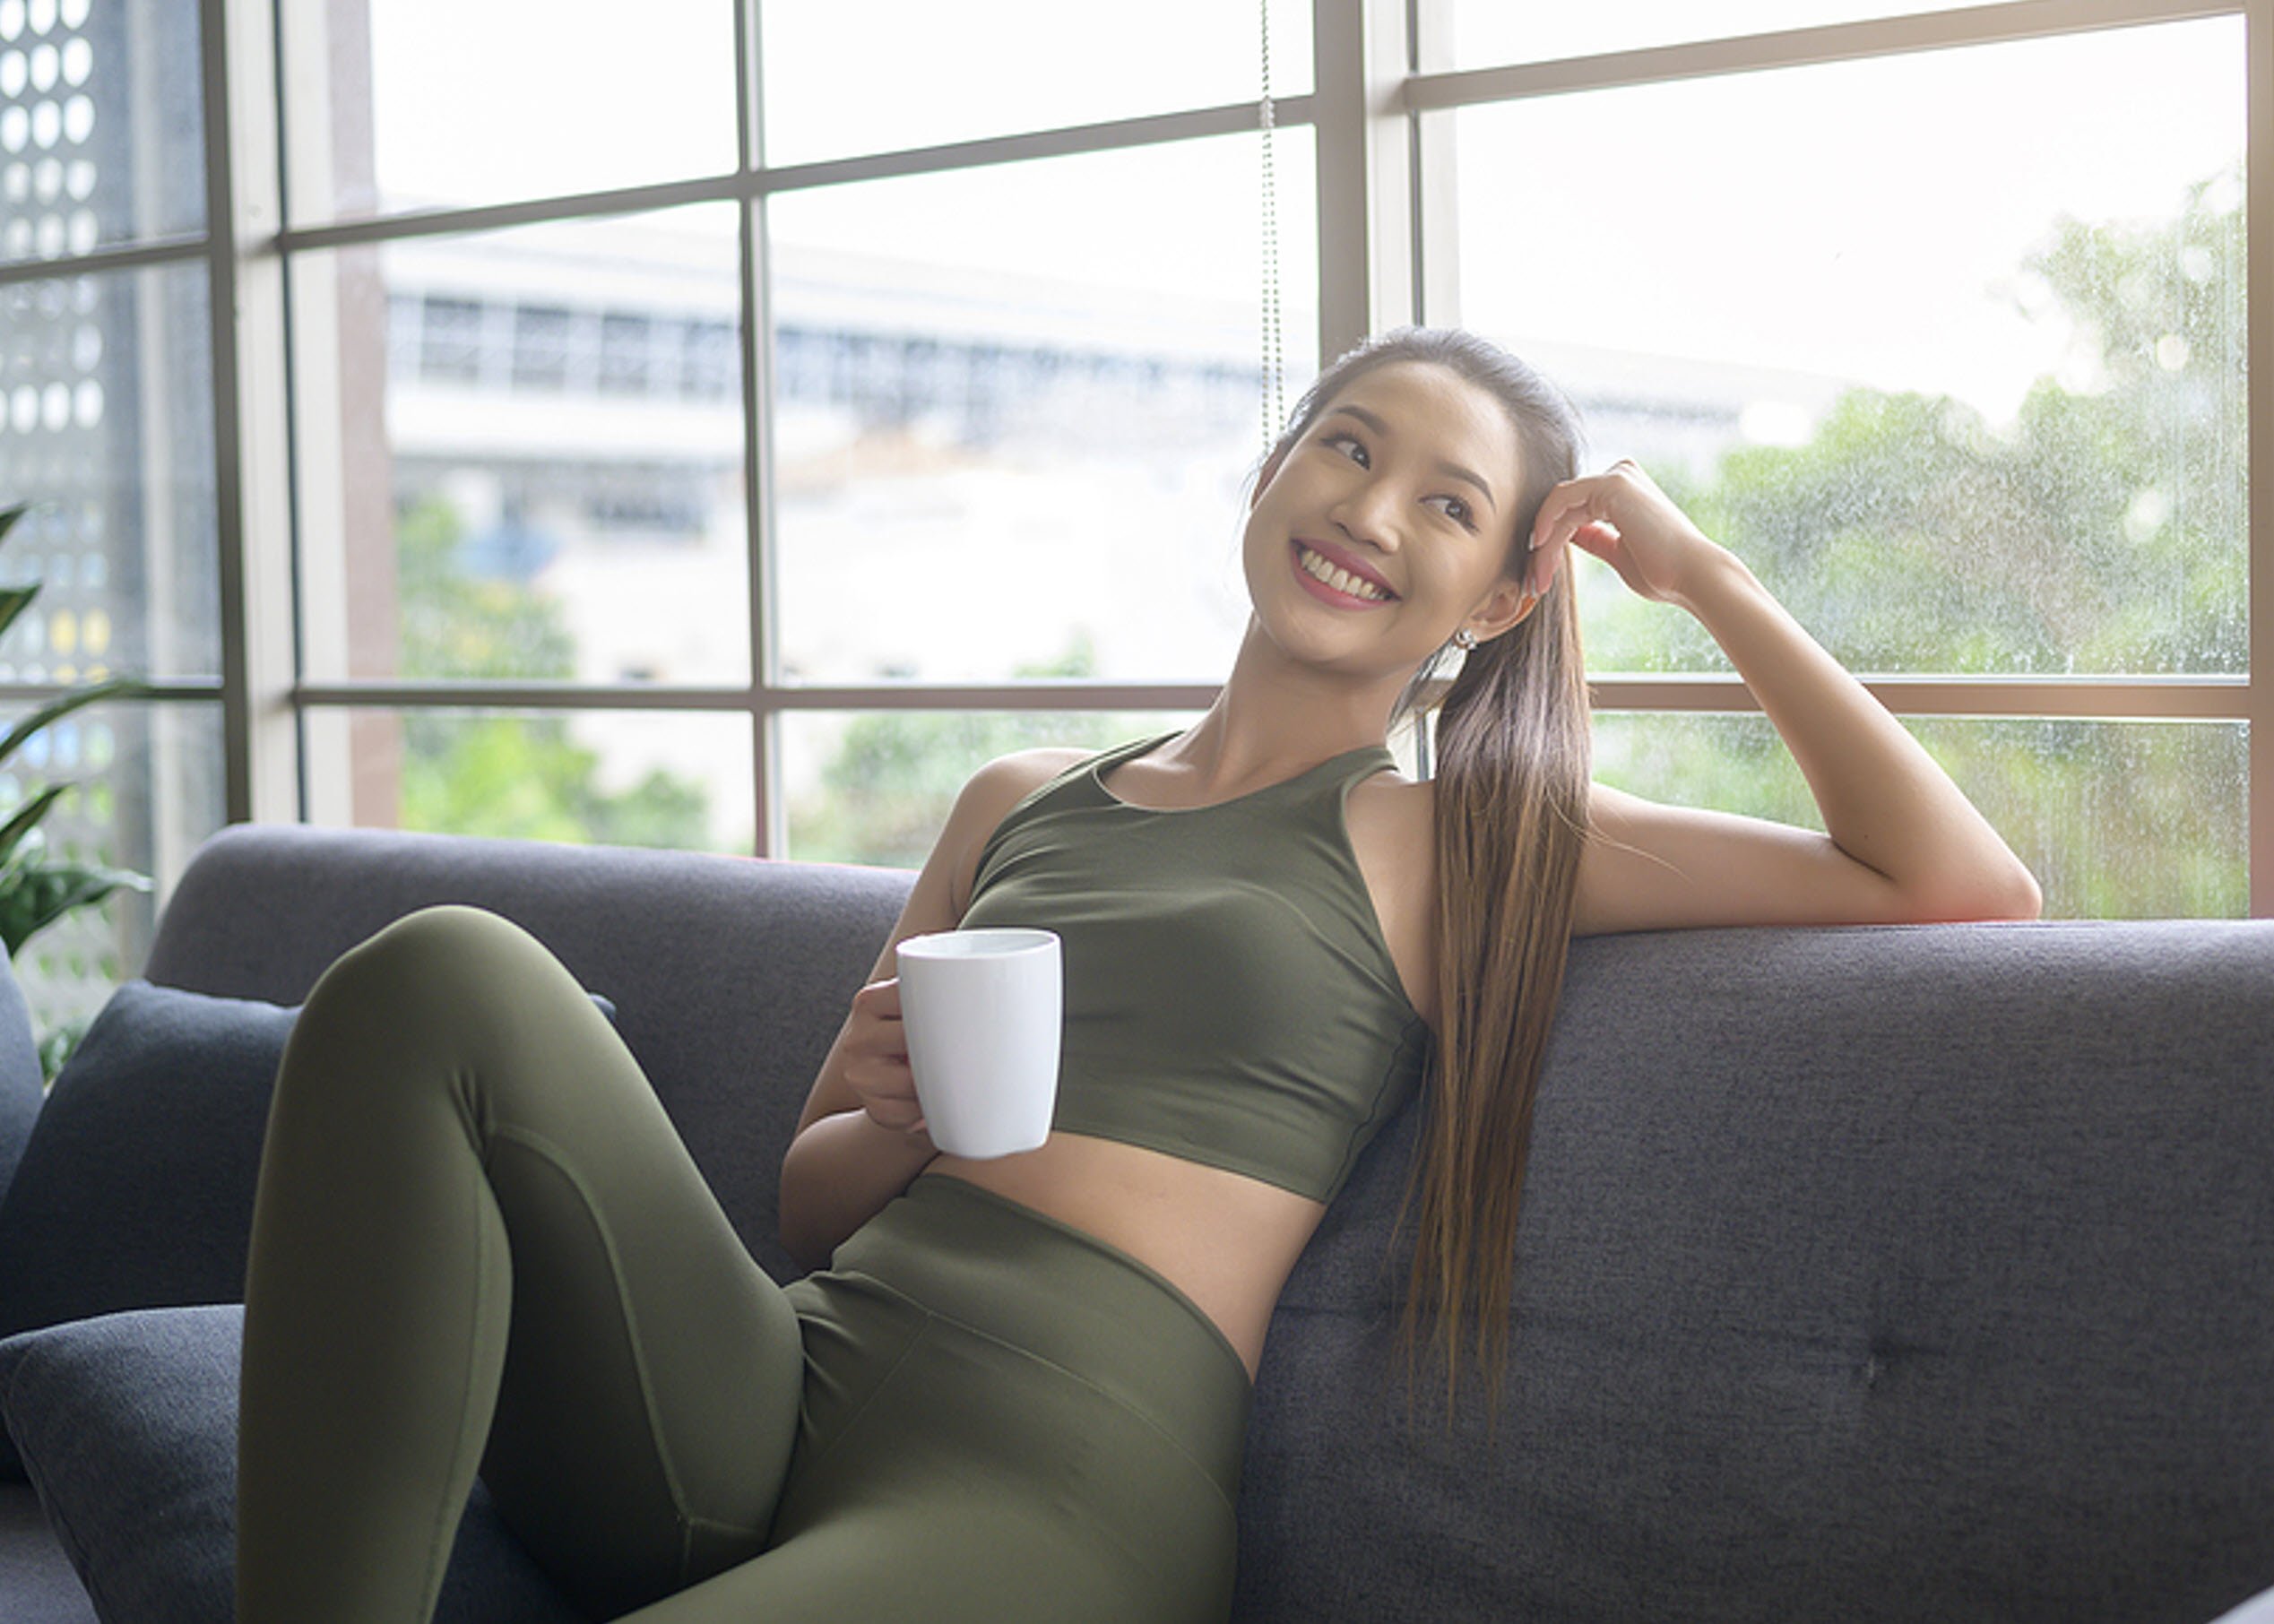 Tea and Health Benefits - Tea and the Fitness Industry